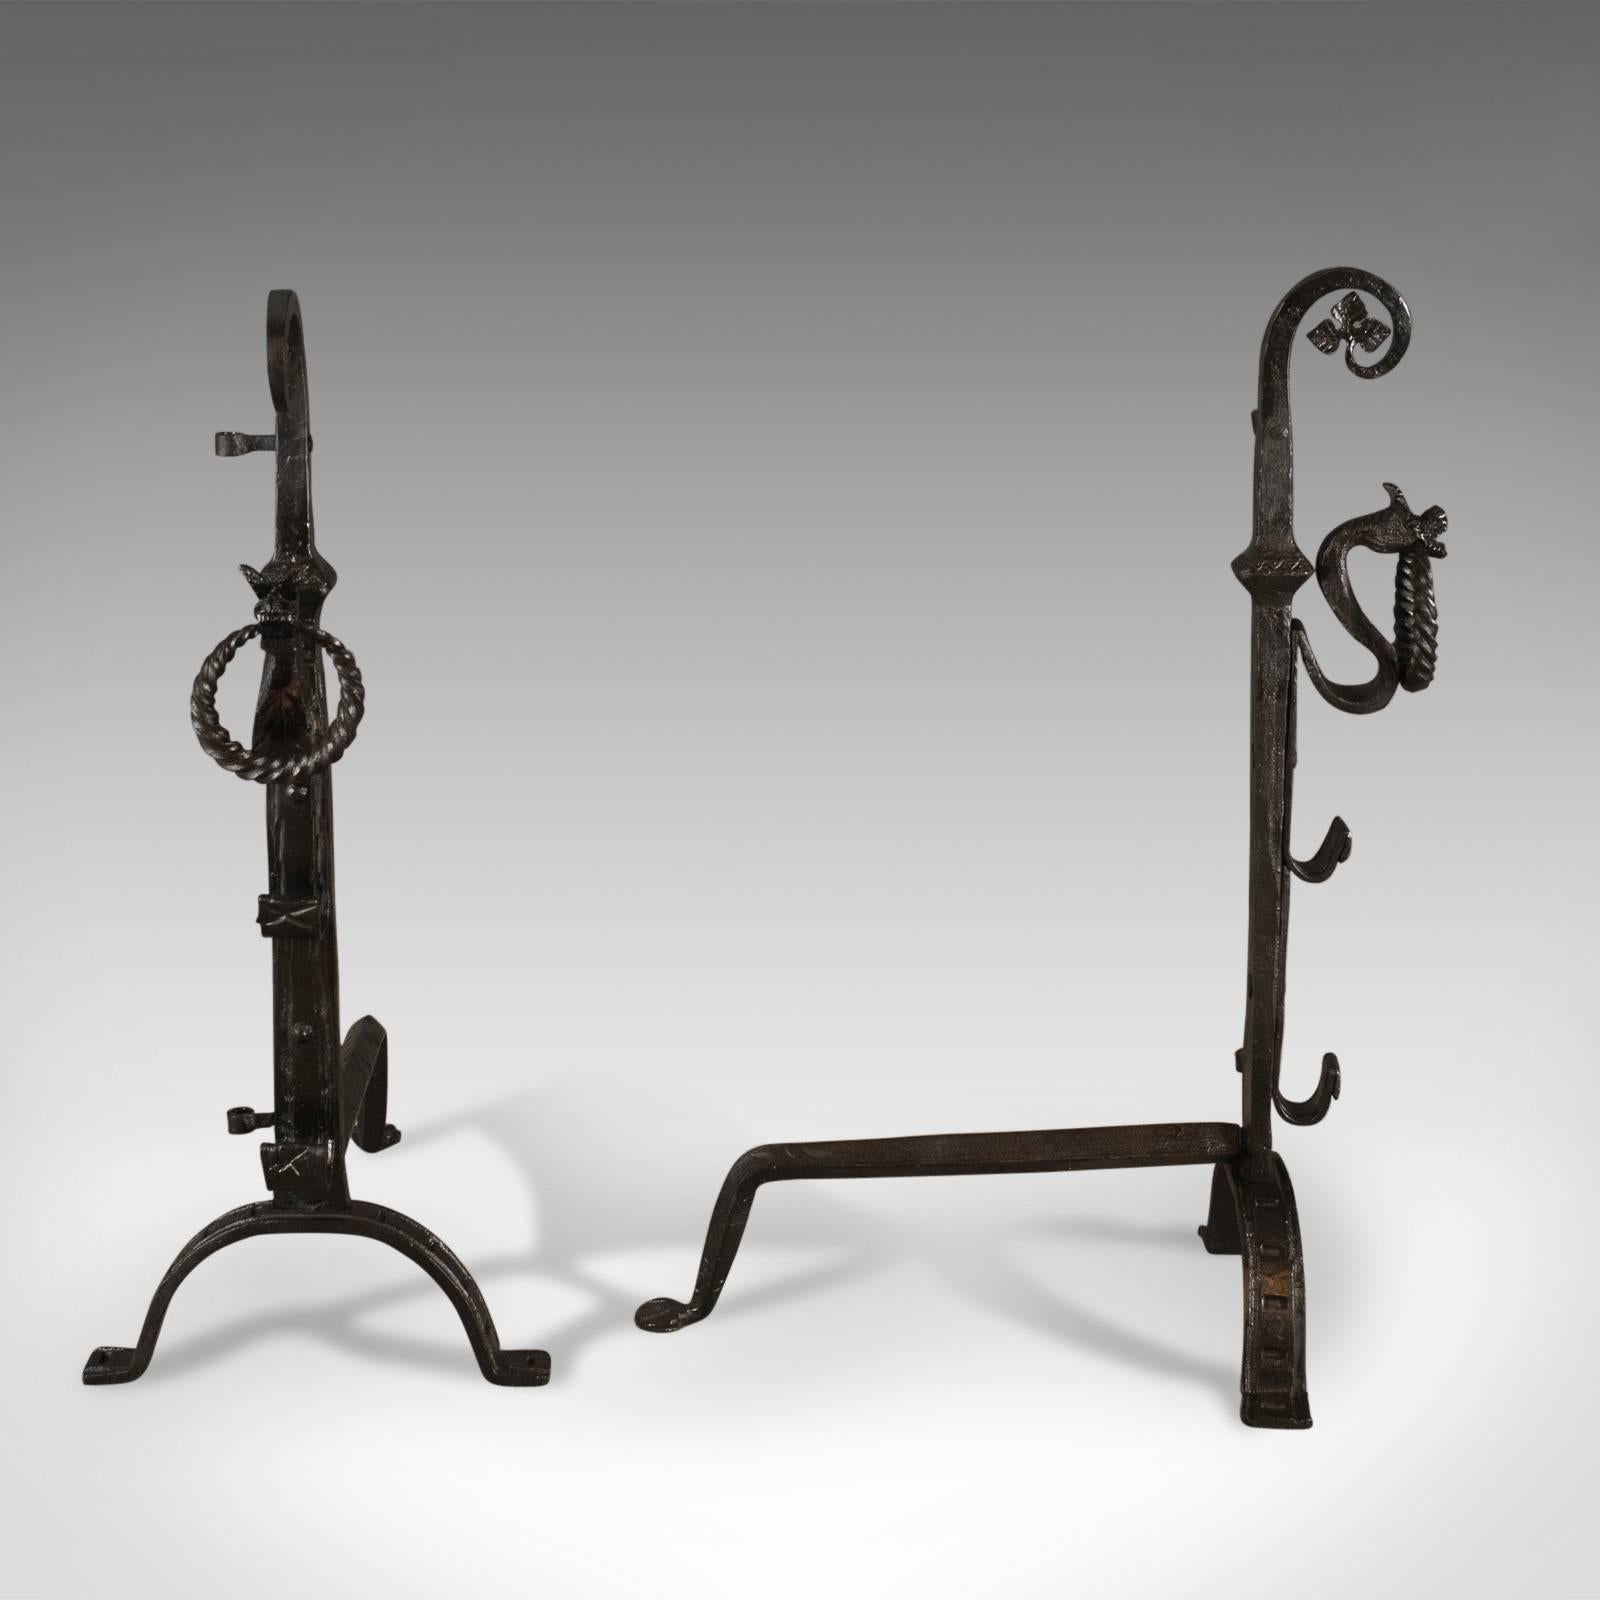 This is a pair of Gothic wrought iron firedogs, medieval revival andirons forged in the late 20th century.

Bold andirons ideal for a large fire basket
Standing upon a tripod with forward arch legs
Medieval revival in taste
Featuring spit